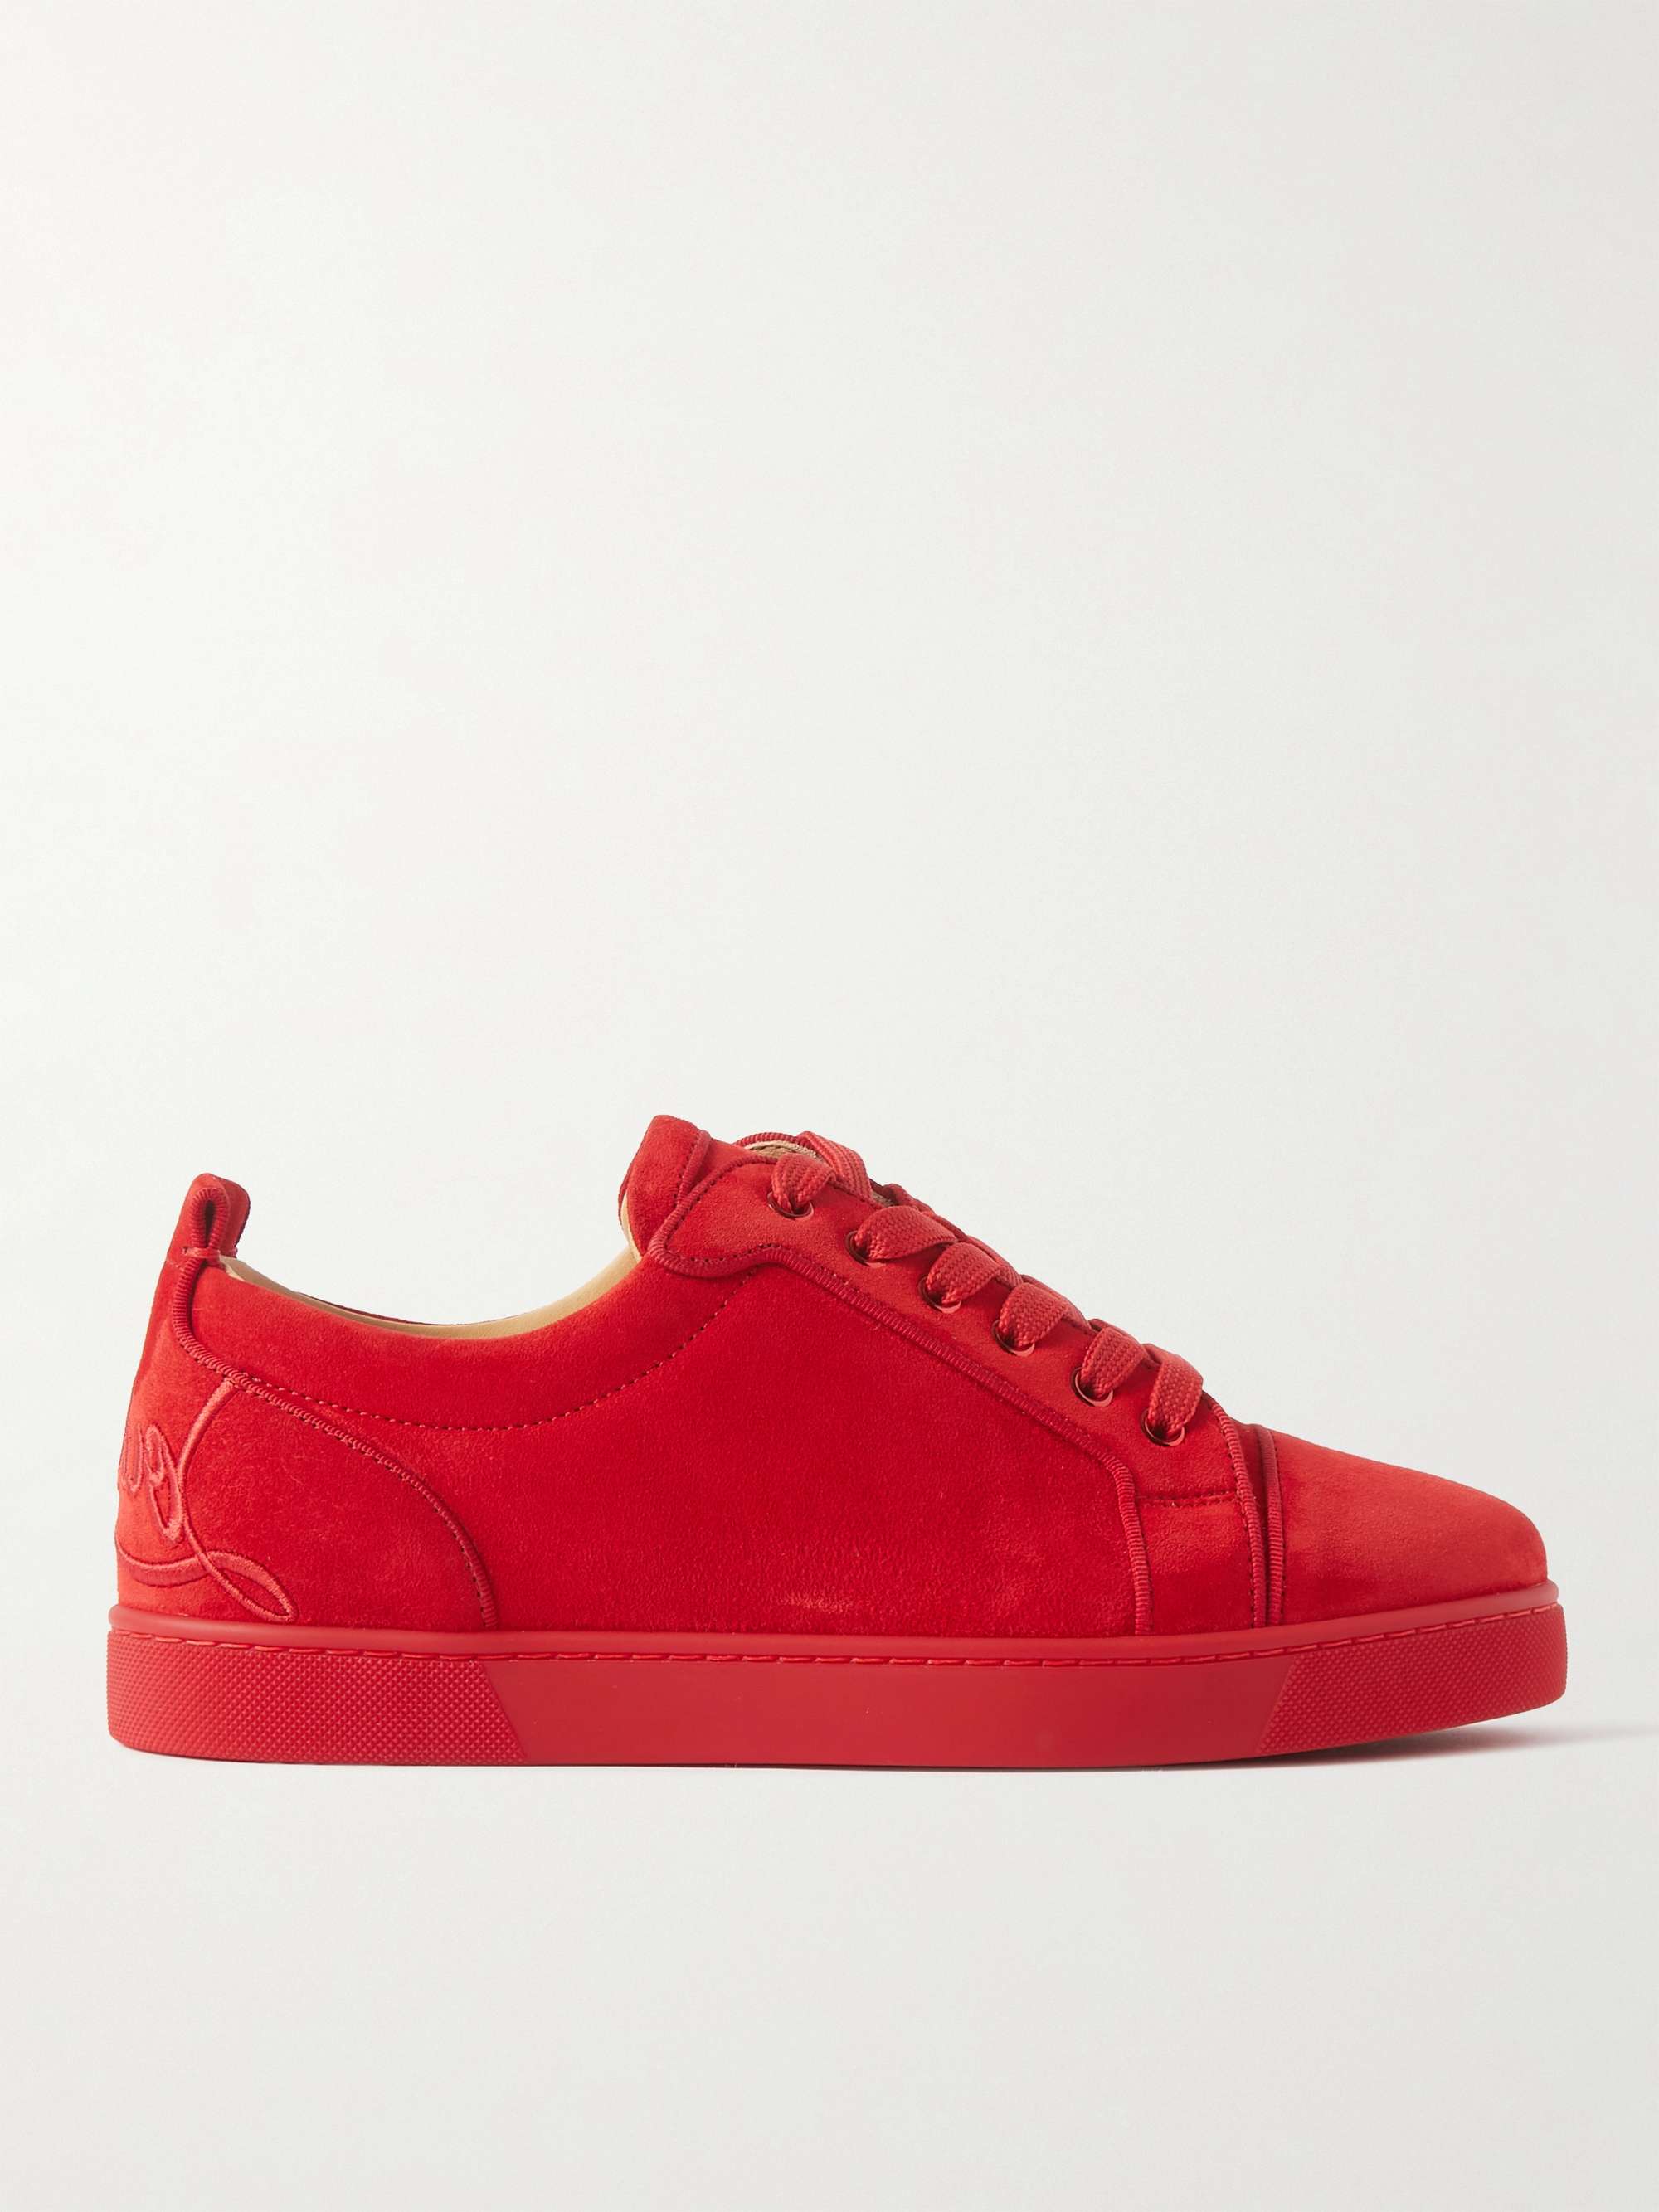 Playground equipment Interpret Please watch Red Fun Louis Junior Logo-Embroidered Suede Sneakers | CHRISTIAN LOUBOUTIN  | MR PORTER